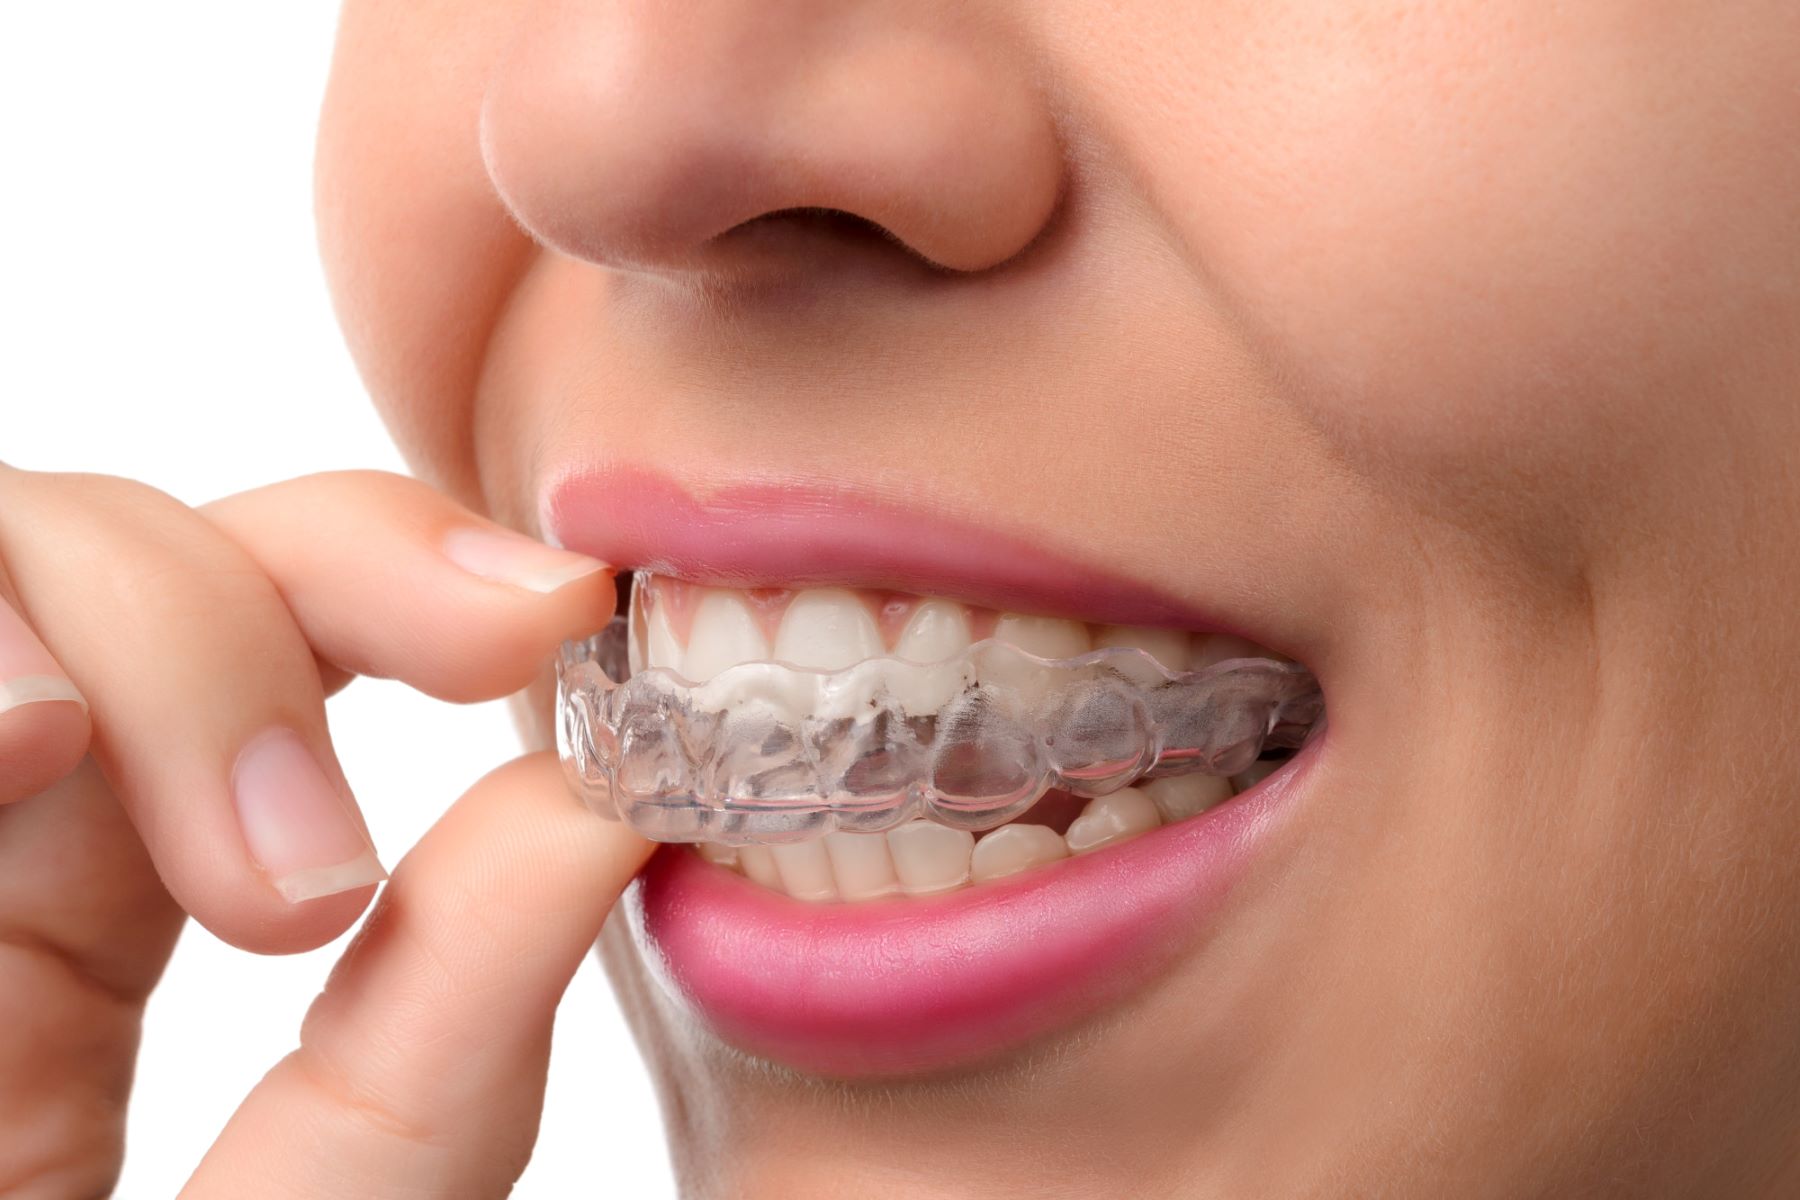 How To Get Invisalign Covered By Insurance